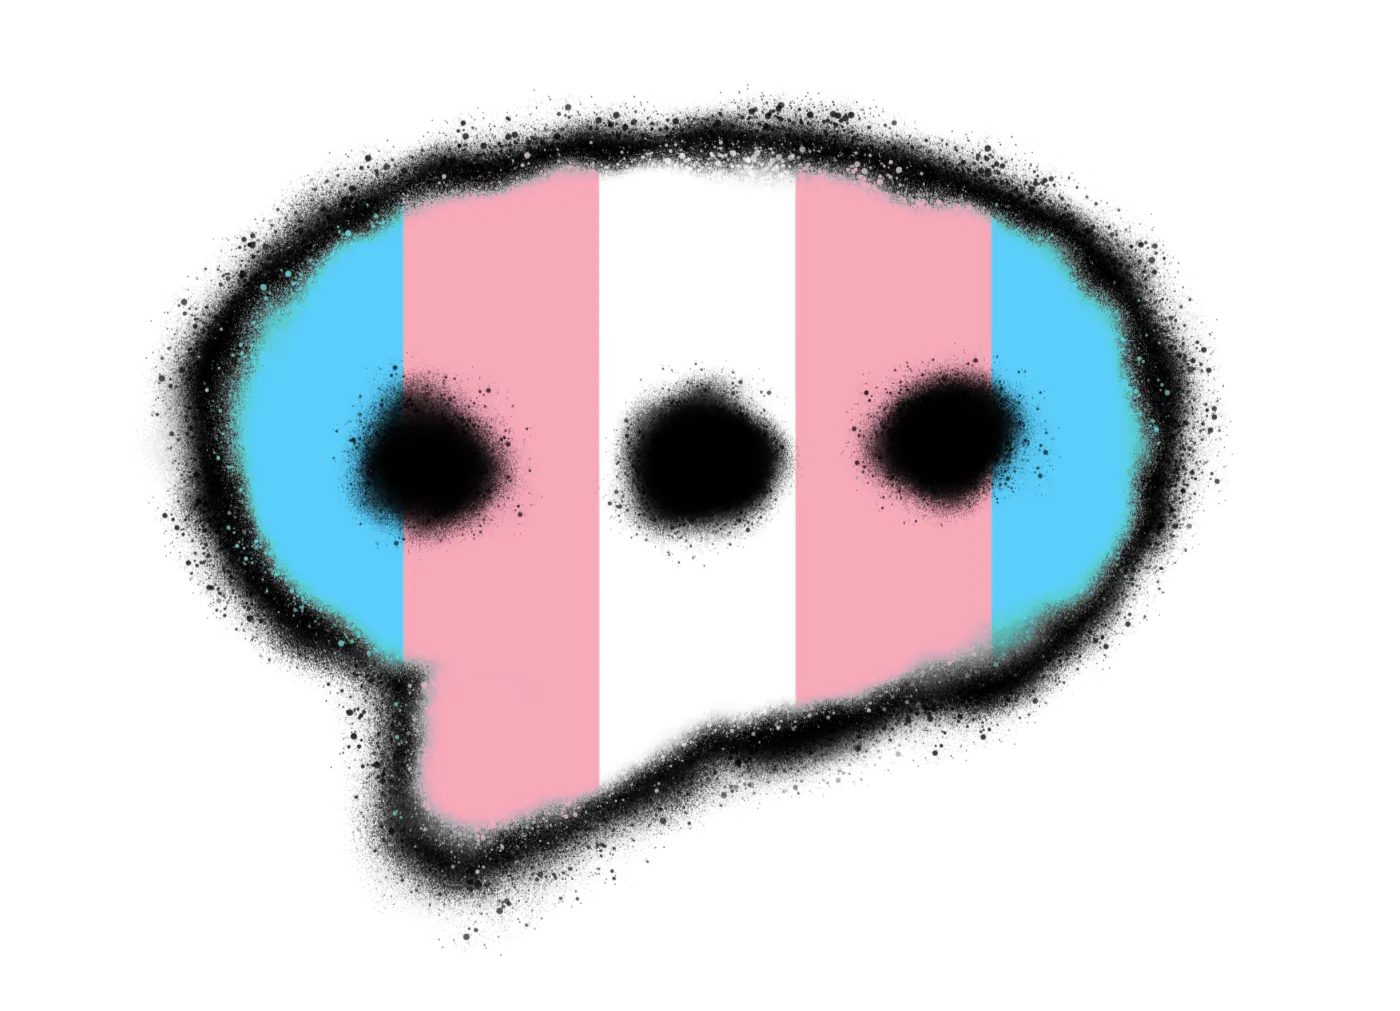 Spray painted speech bubble with three dots in it and an overlay of the trans pride colors